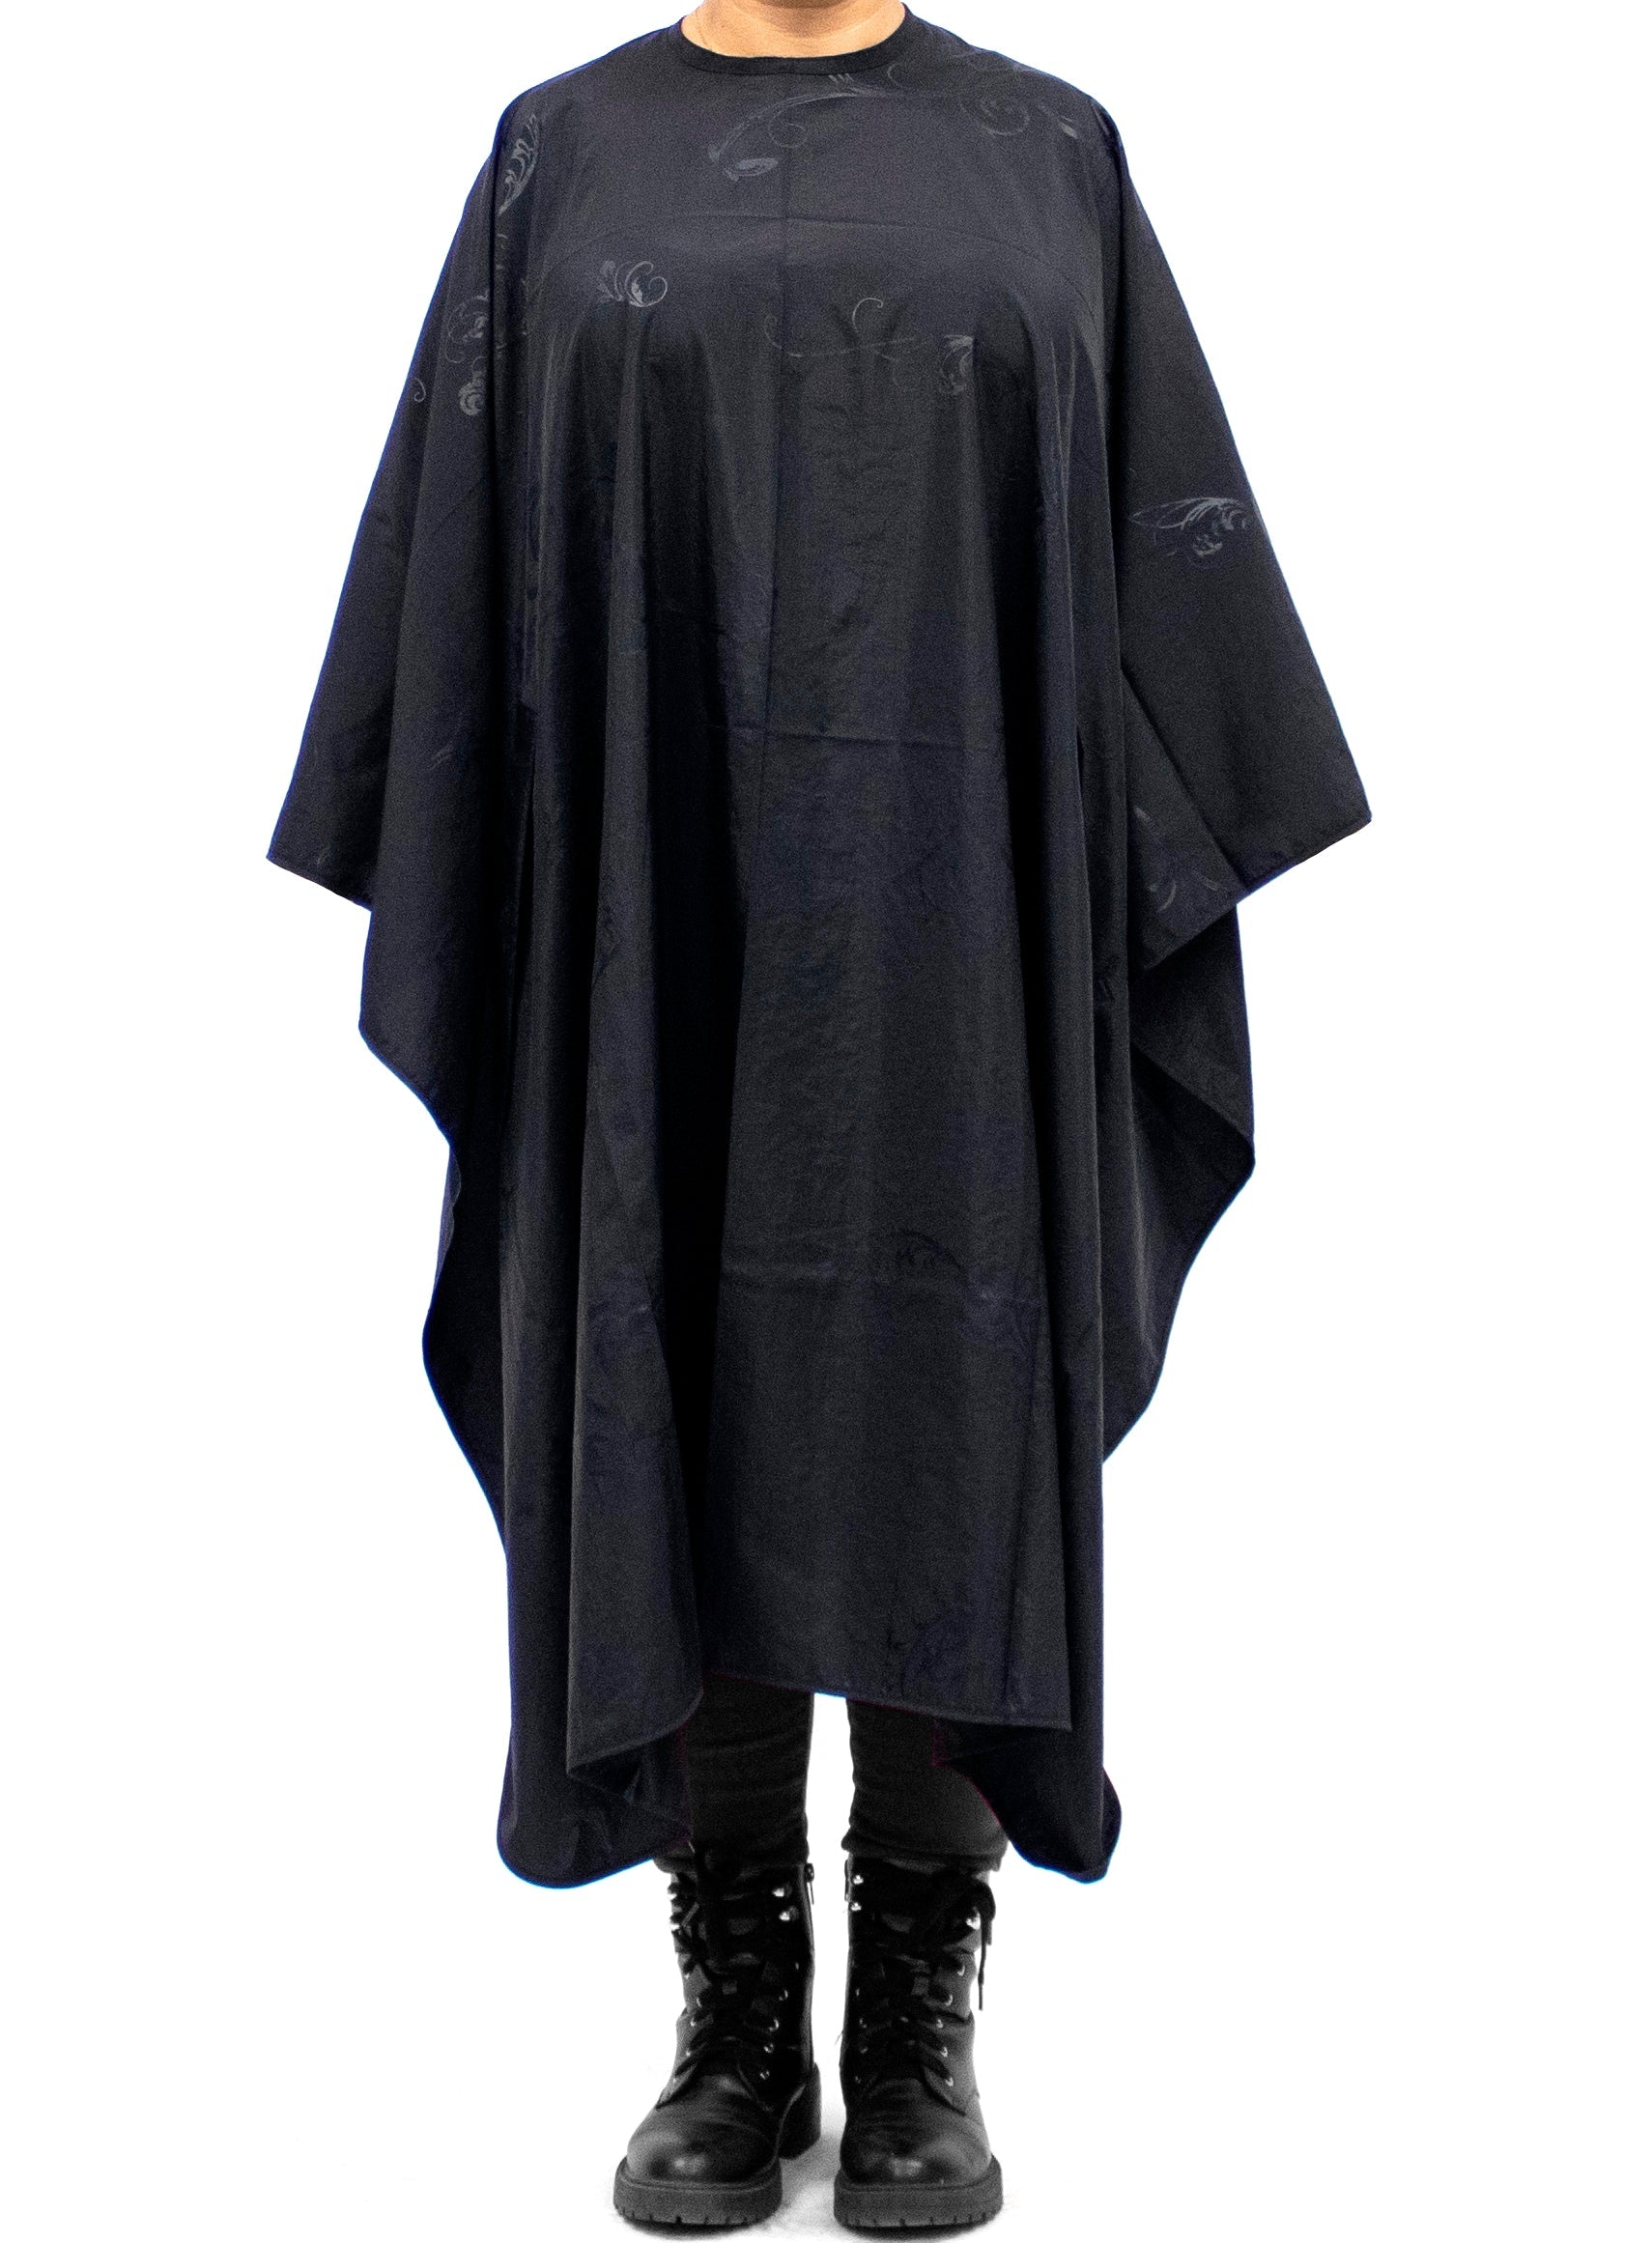 Baroque Cape For Cutting & Styling - Black HairArt Int'l Inc.